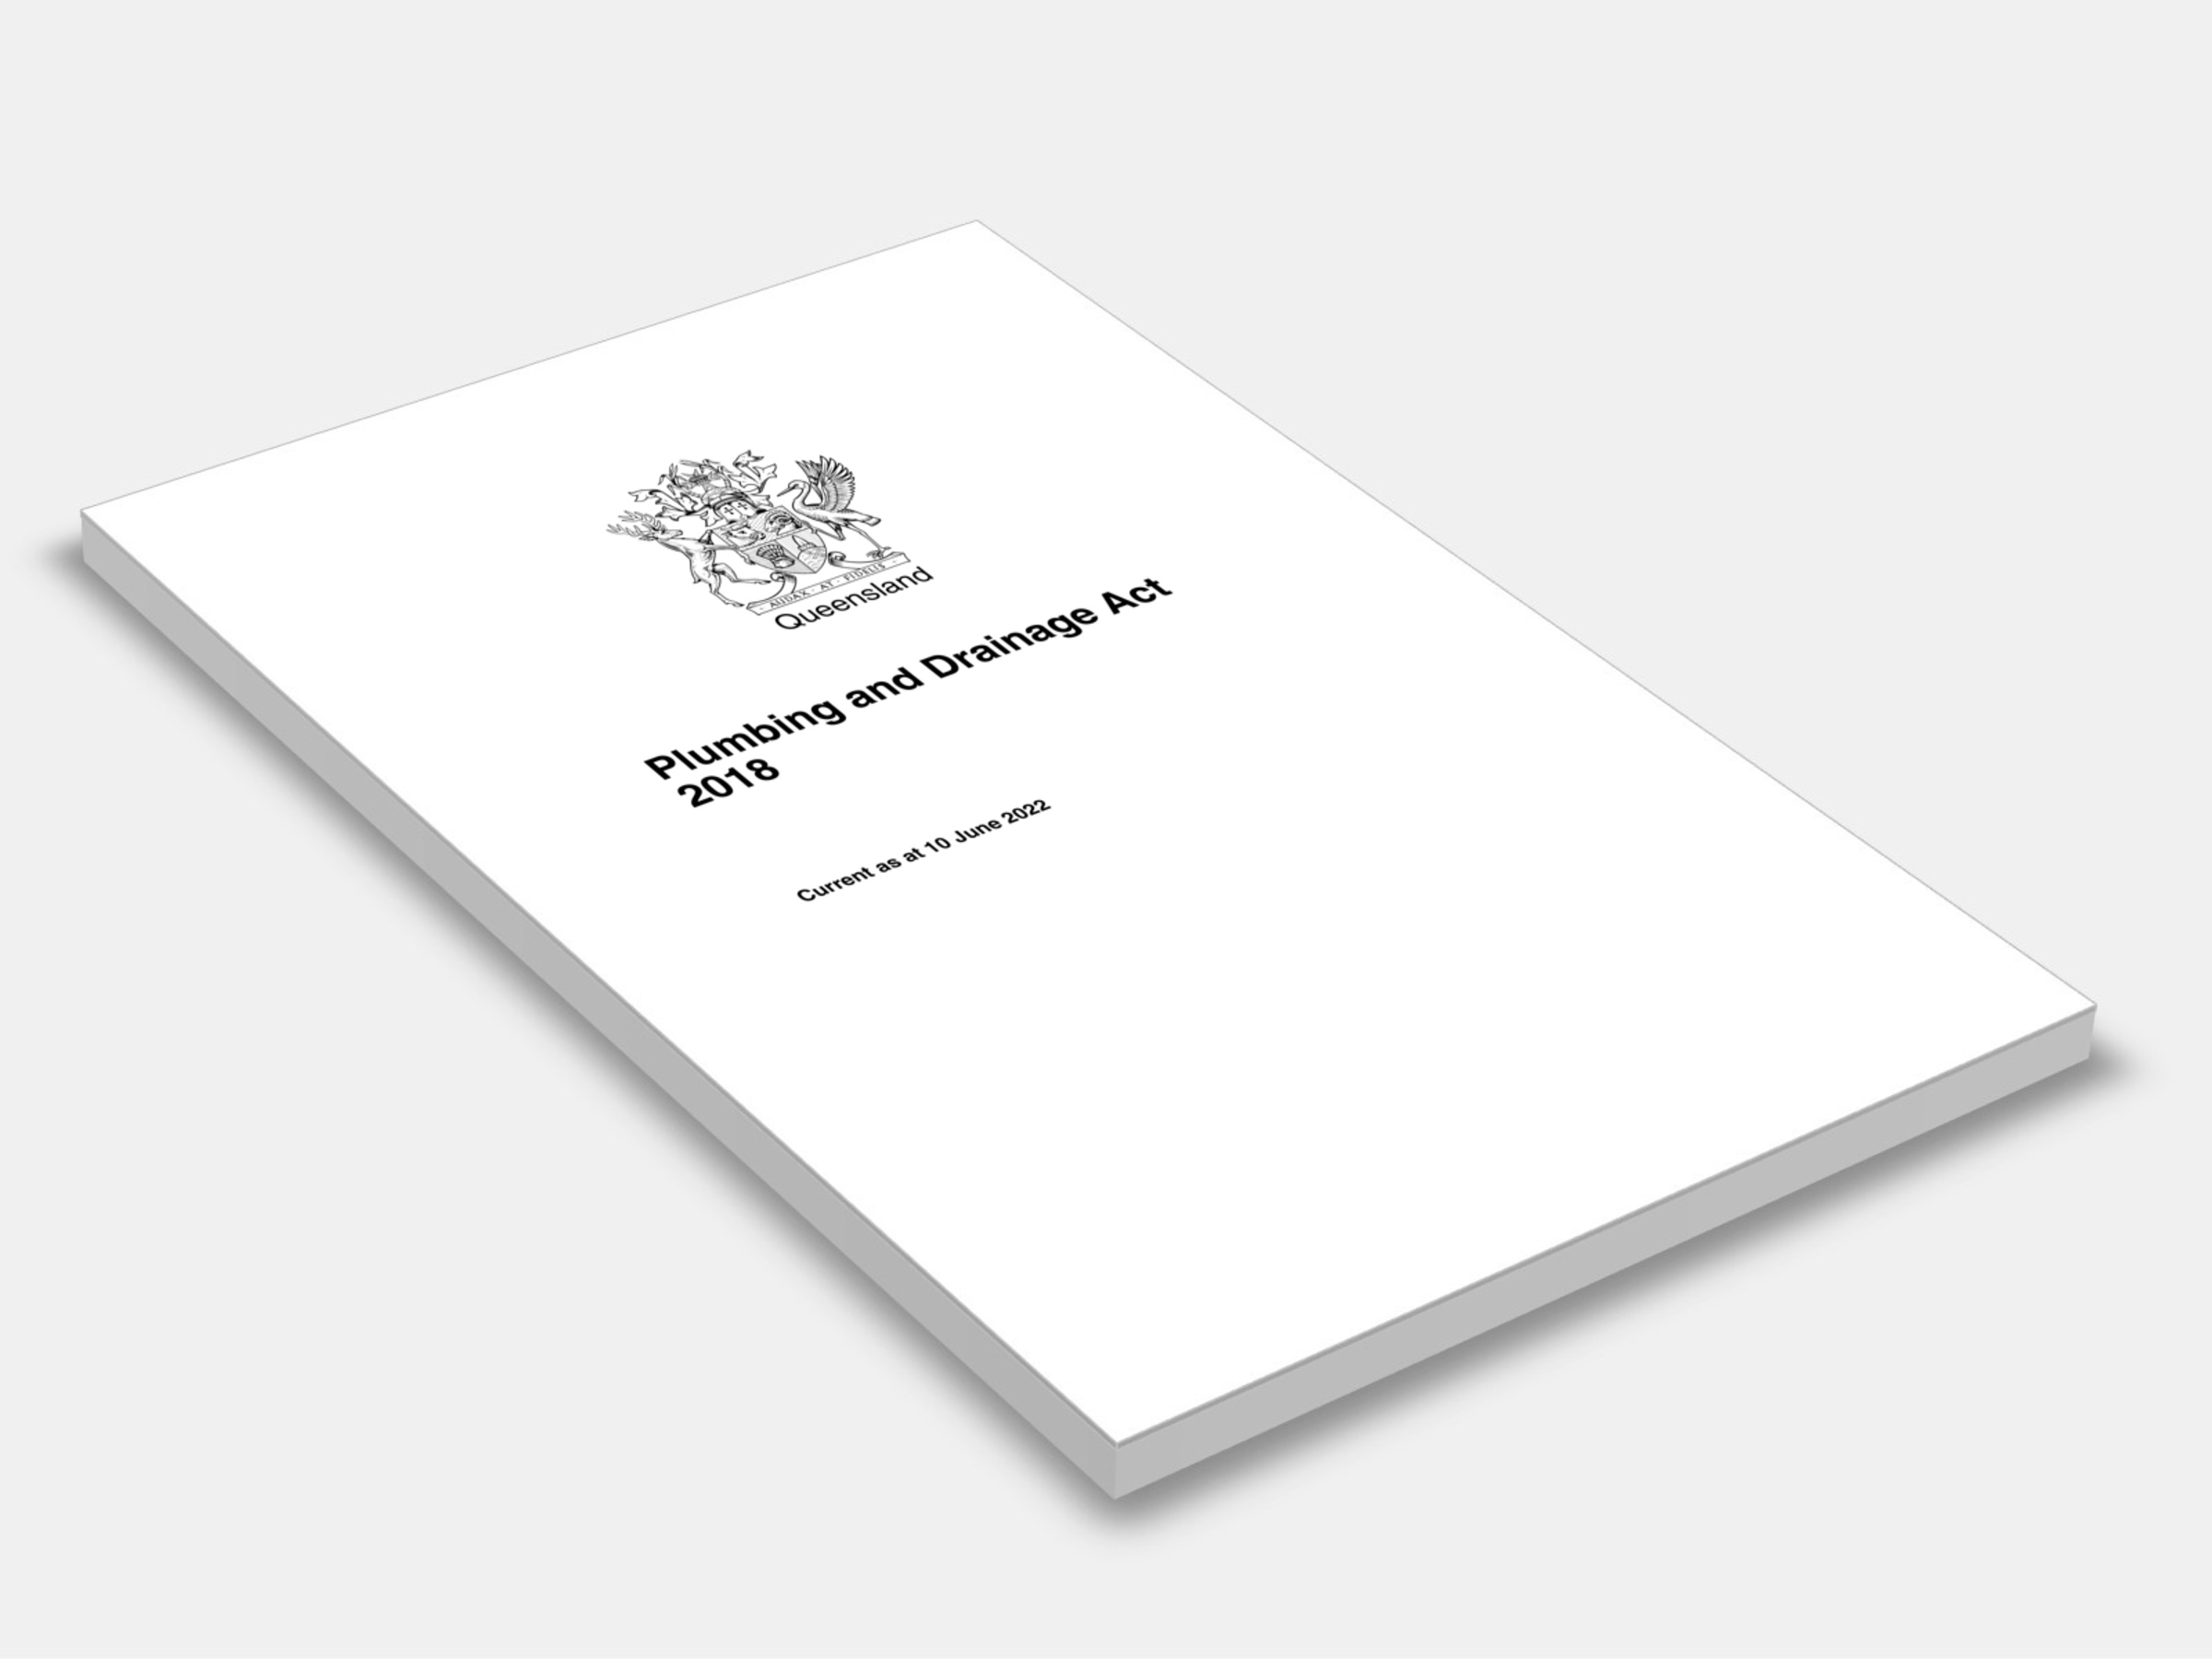 Plumbing and Drainage Act 2018 cover